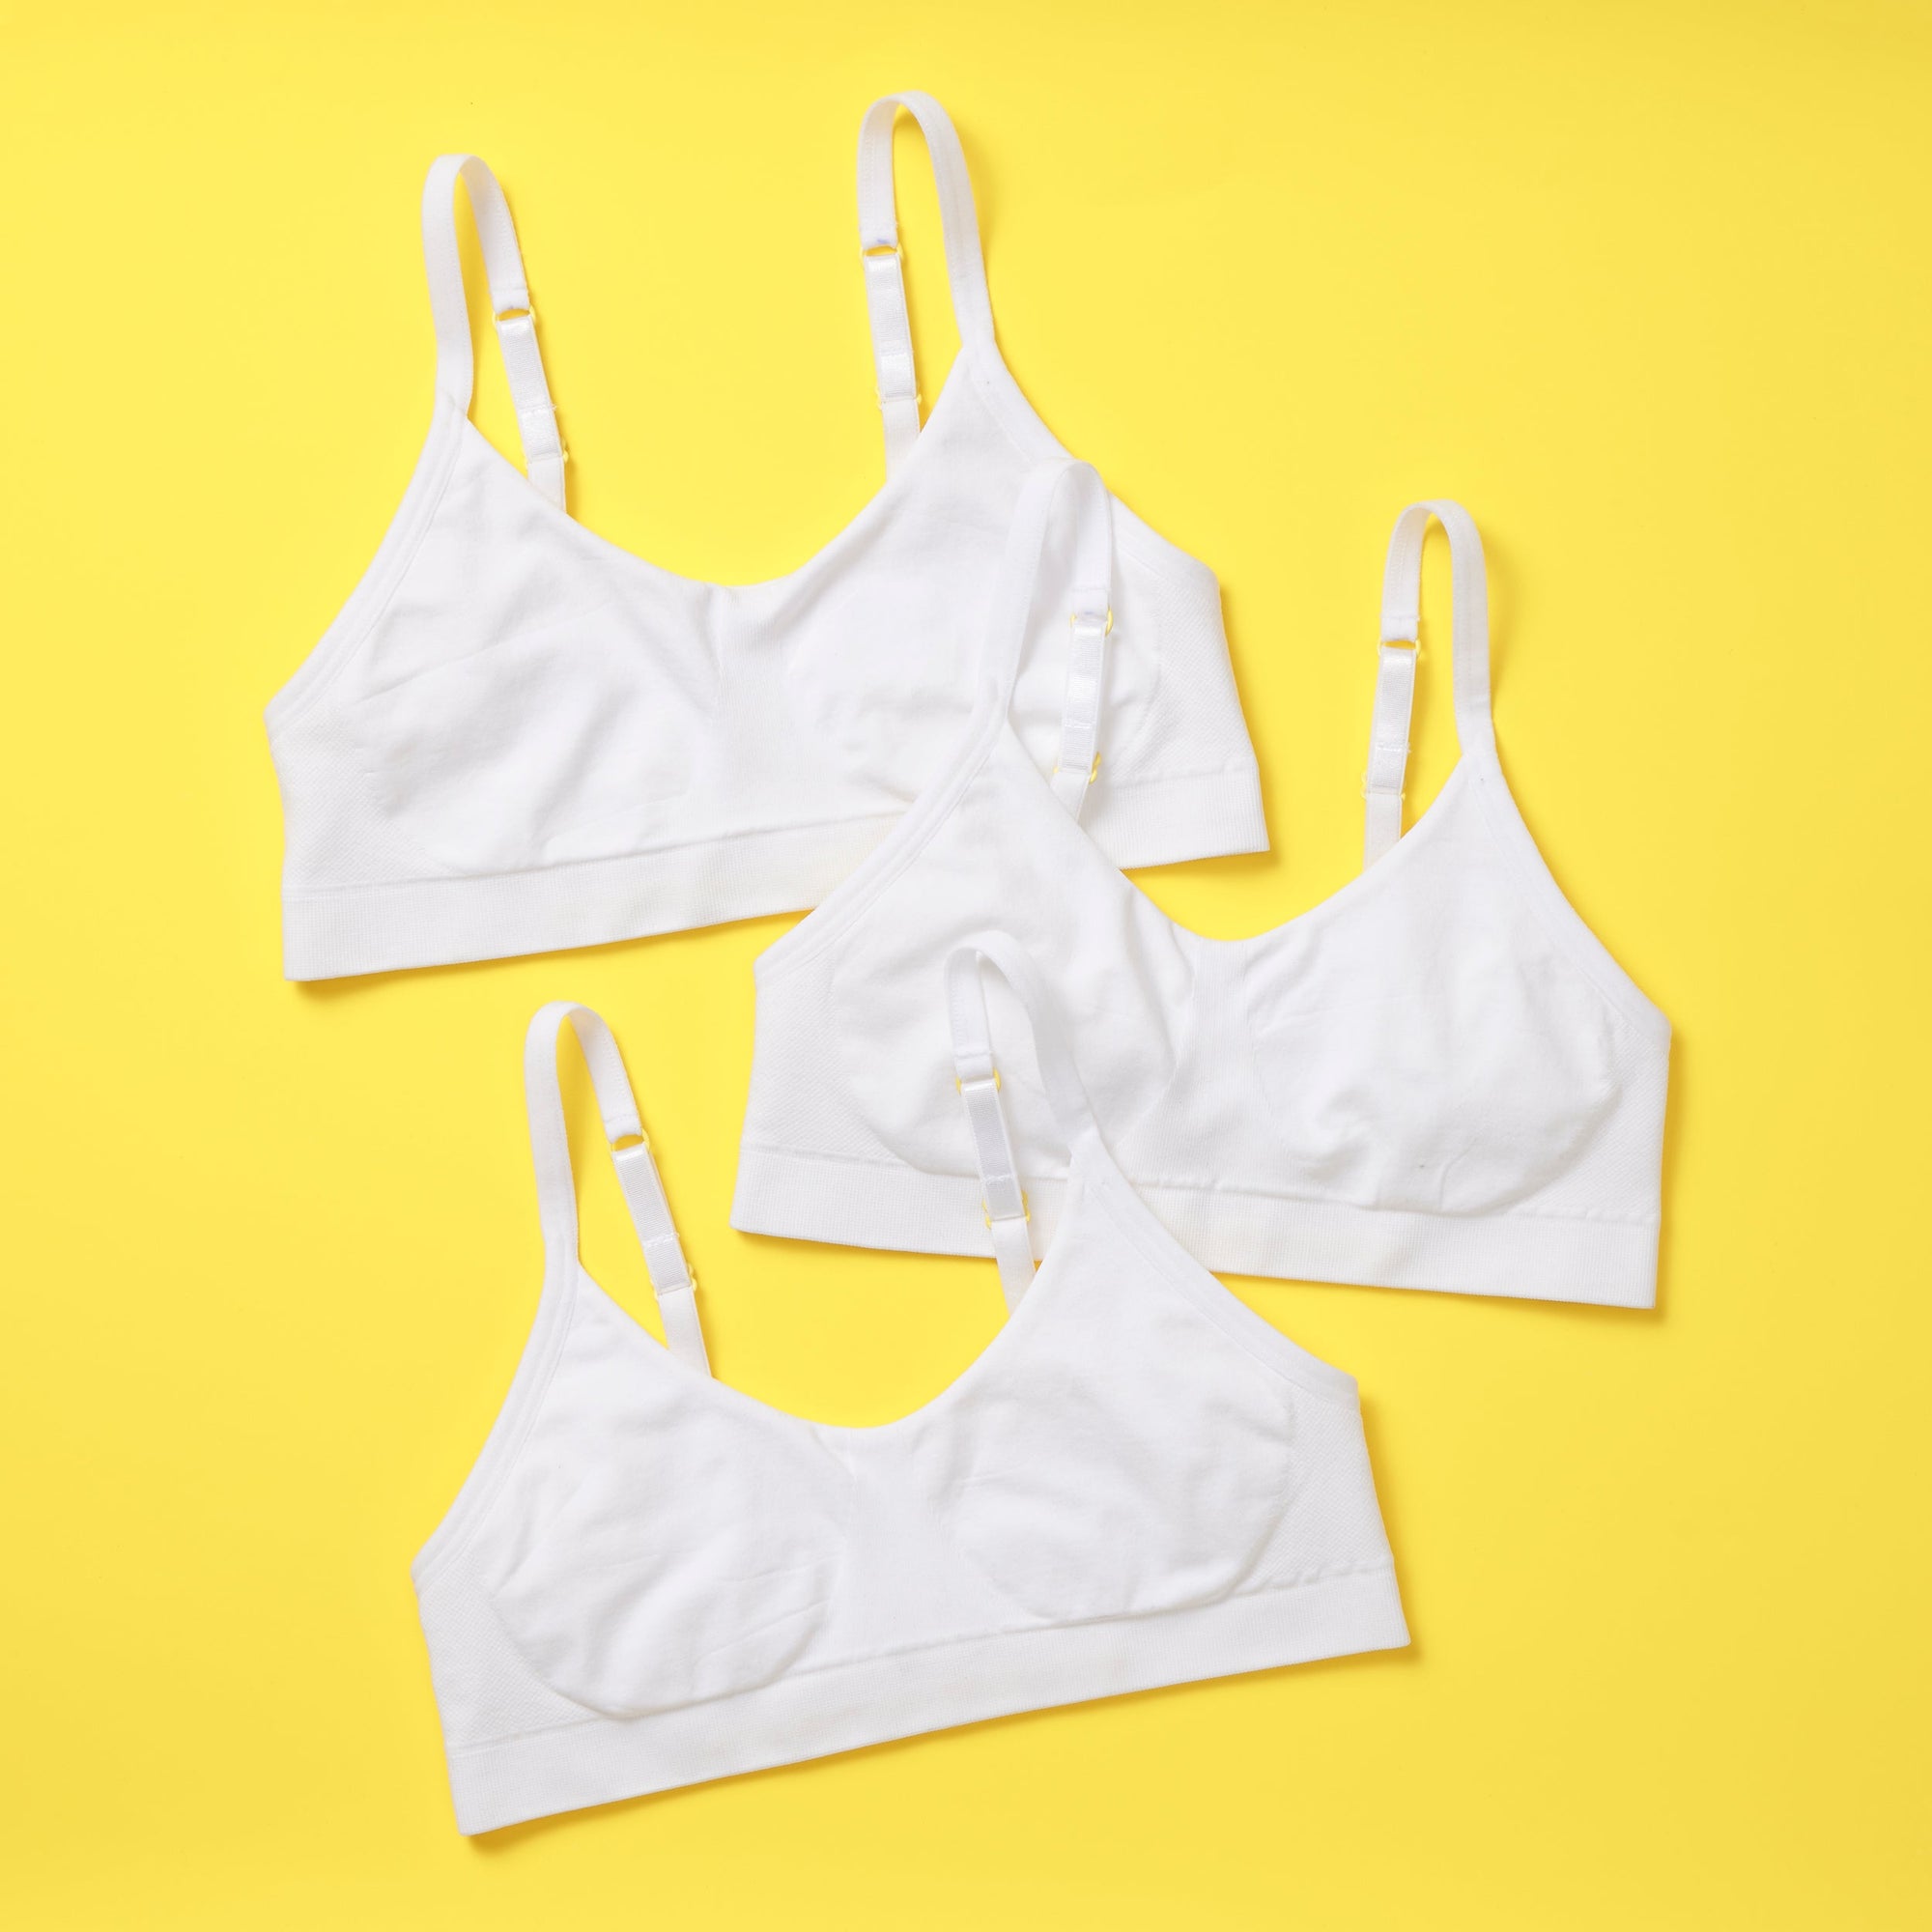 Introducing: The YellowBerry Company That's Creating Age Appropriate Kids  Innerwear